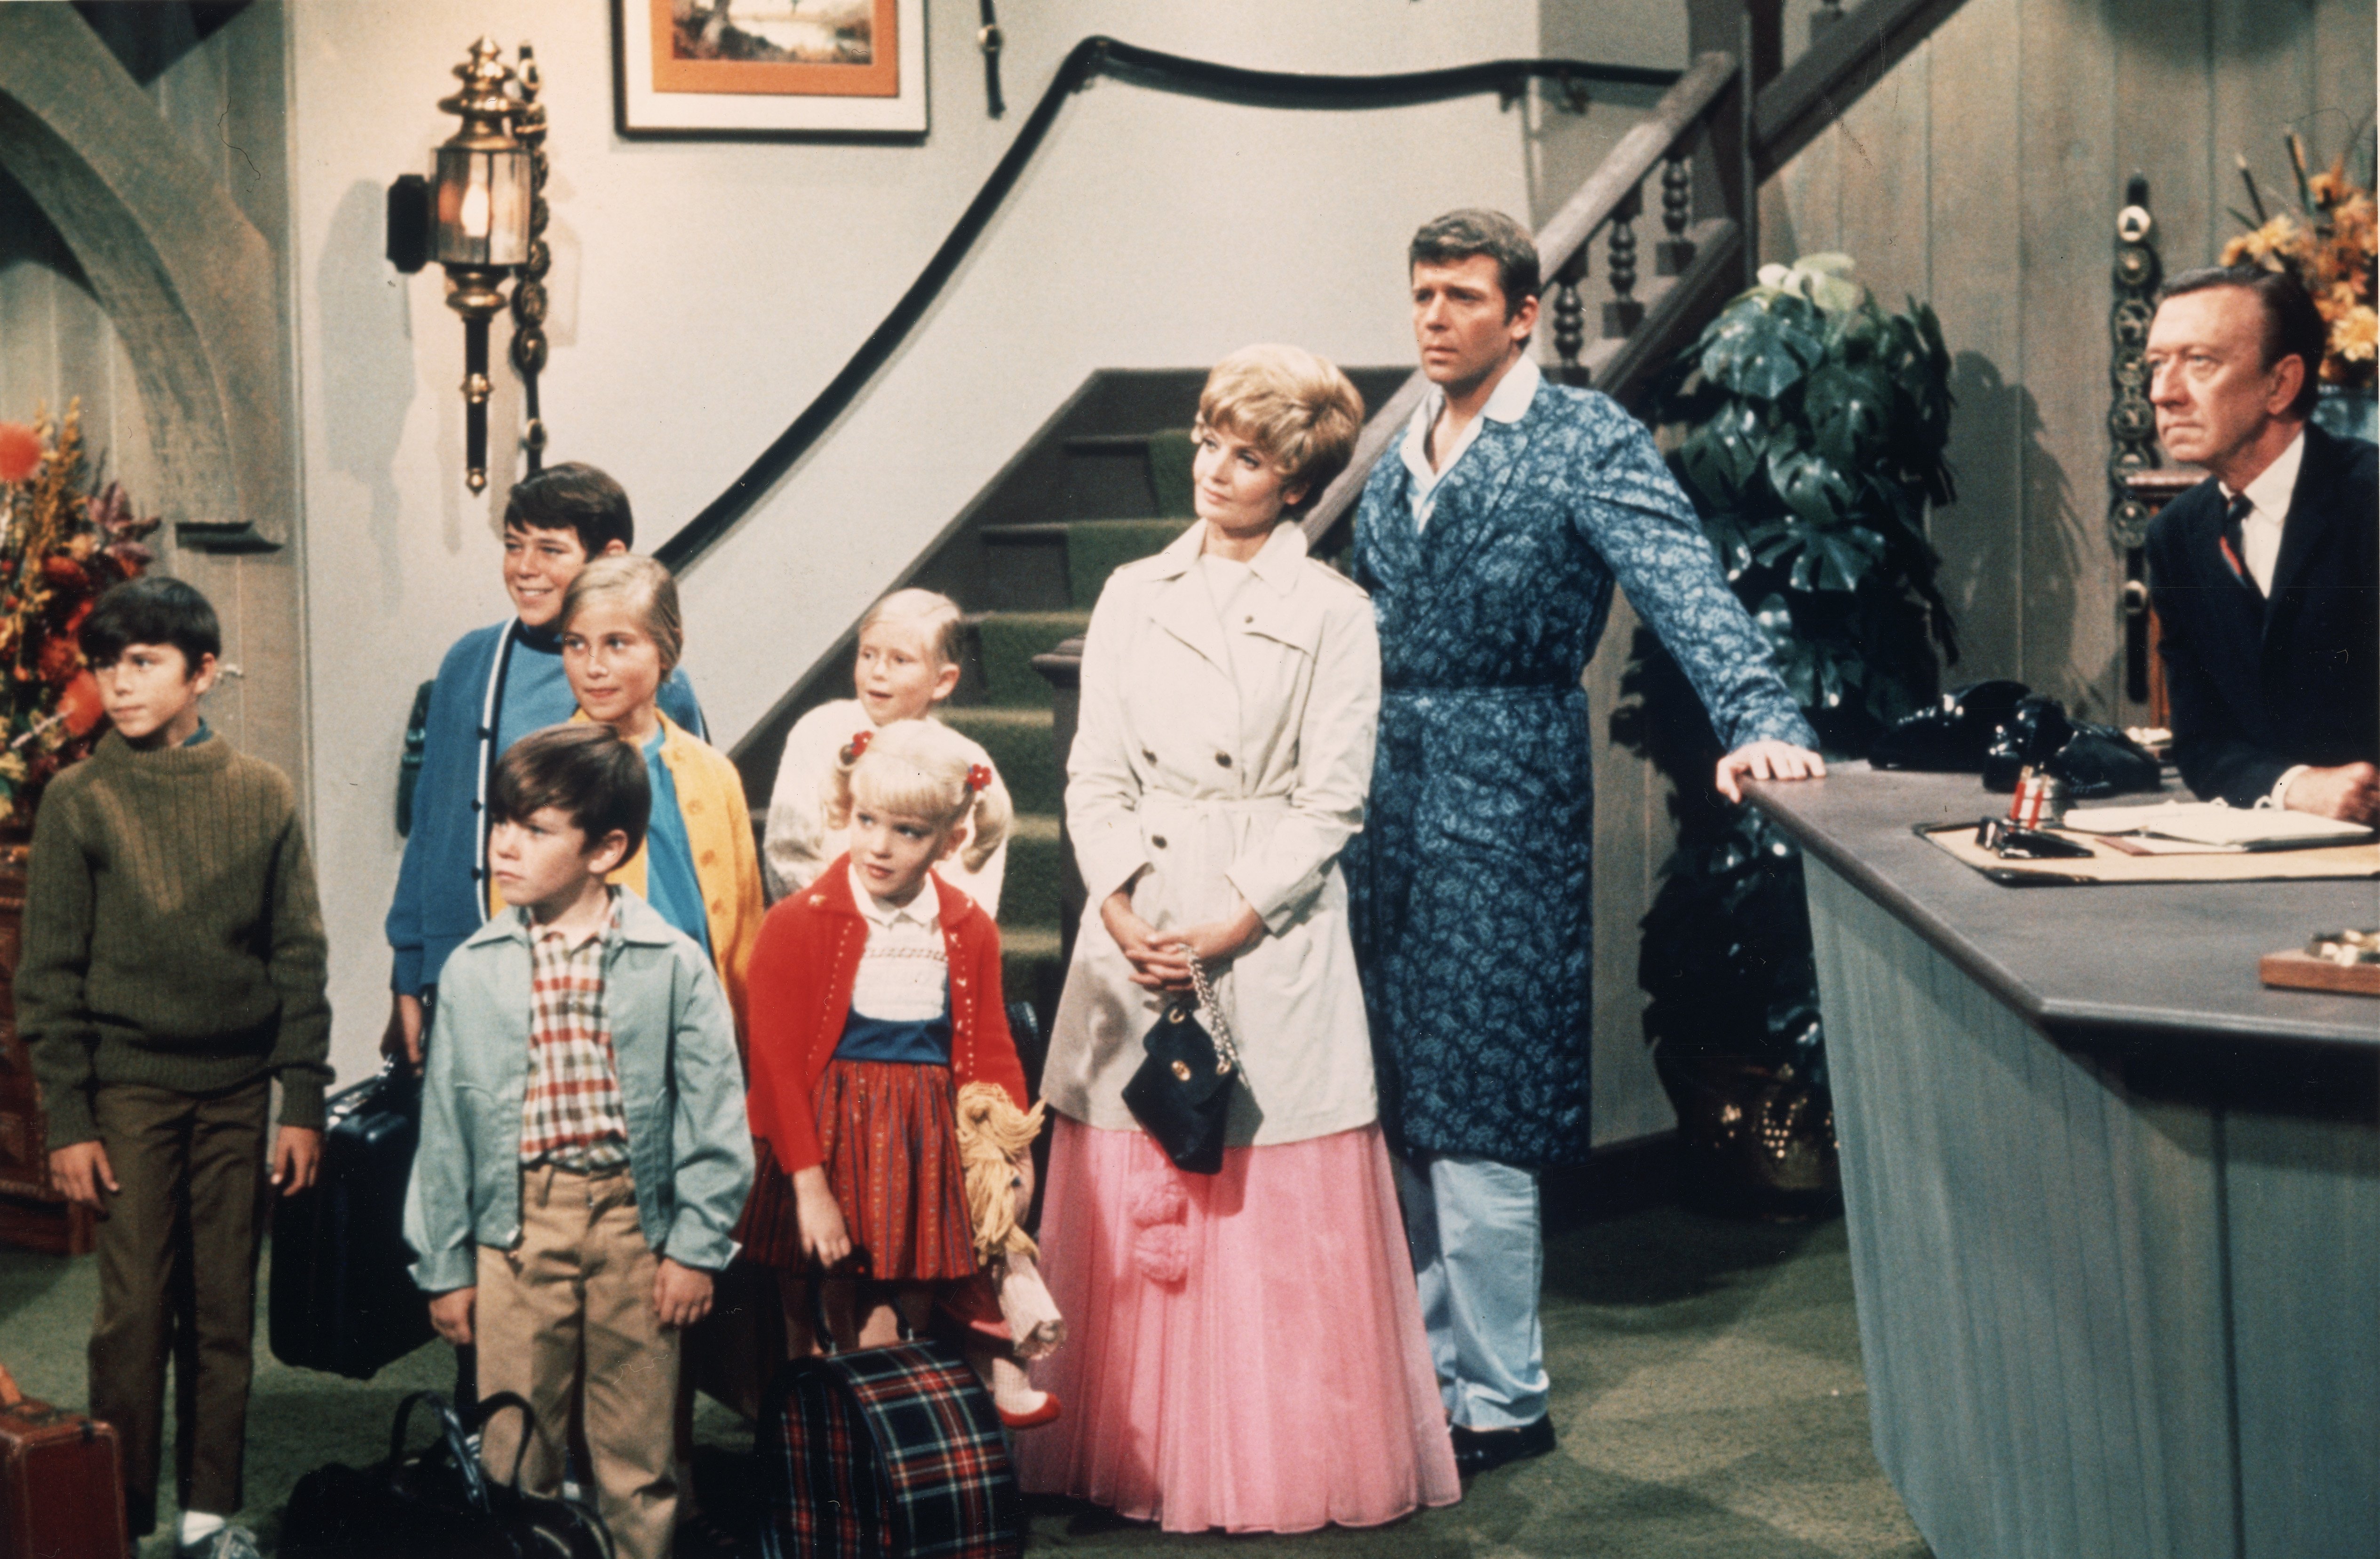 Robert Reed and Florence Henderson stand in a hotel lobby with the rest of the cast of 'The Brady Bunch' in 1969 | Photo: Getty Images